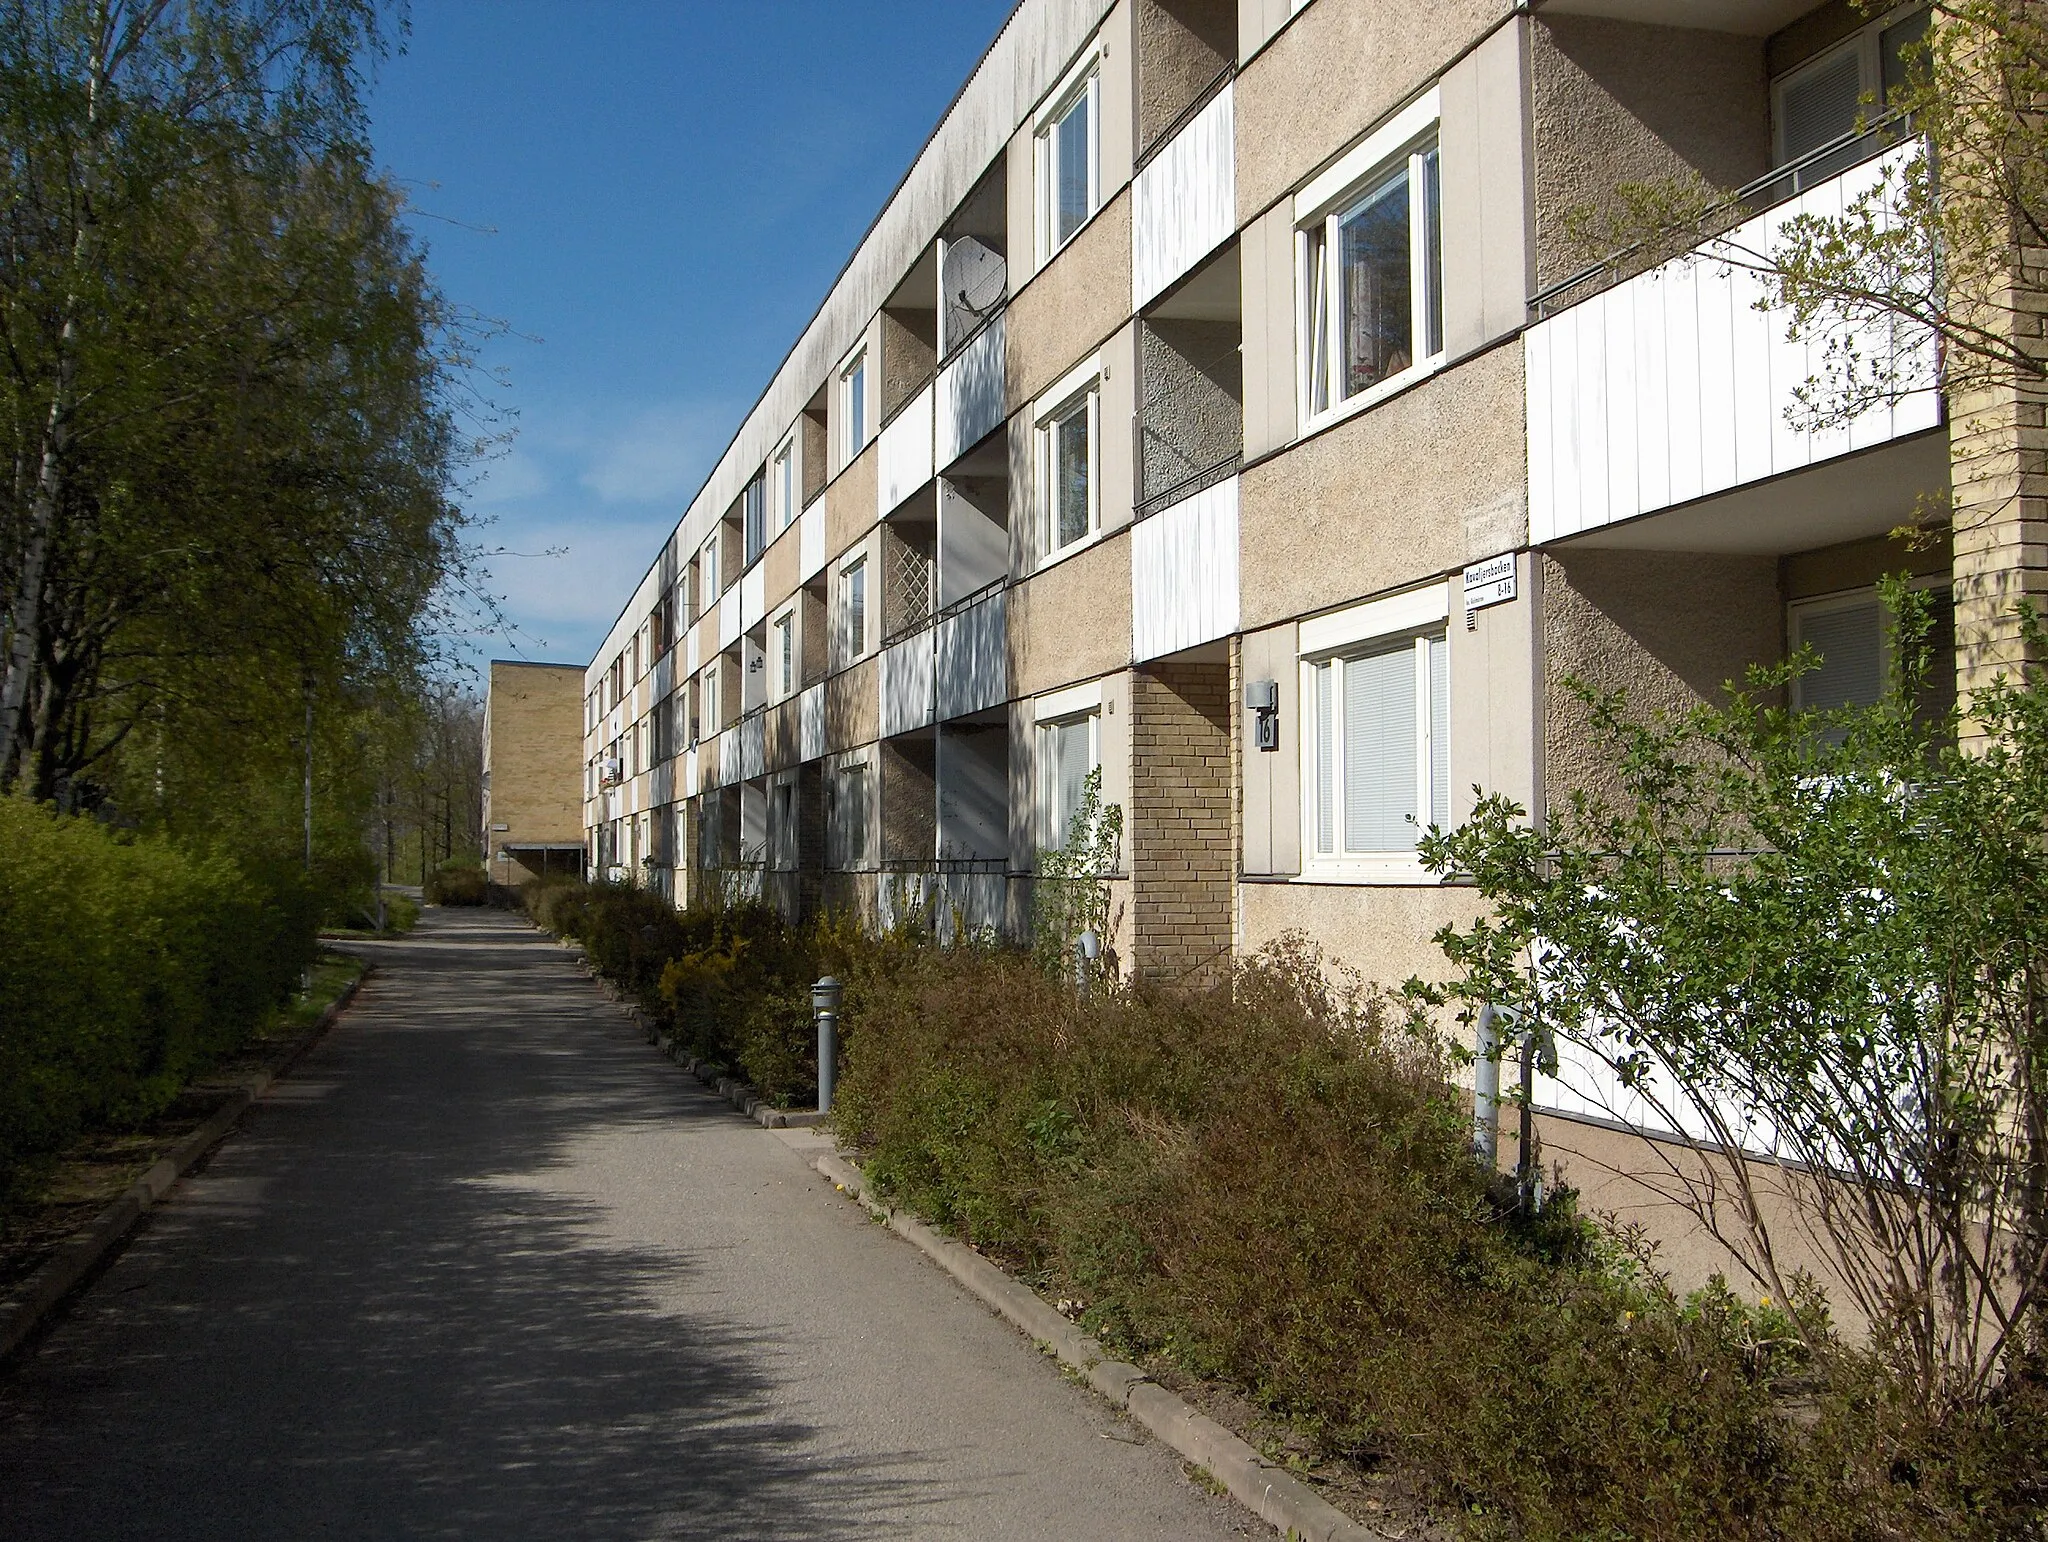 Photo showing: Typical residential block in Ör, Sundbyberg municipality, Sweden. This house is located at Kavaljersbacken street.